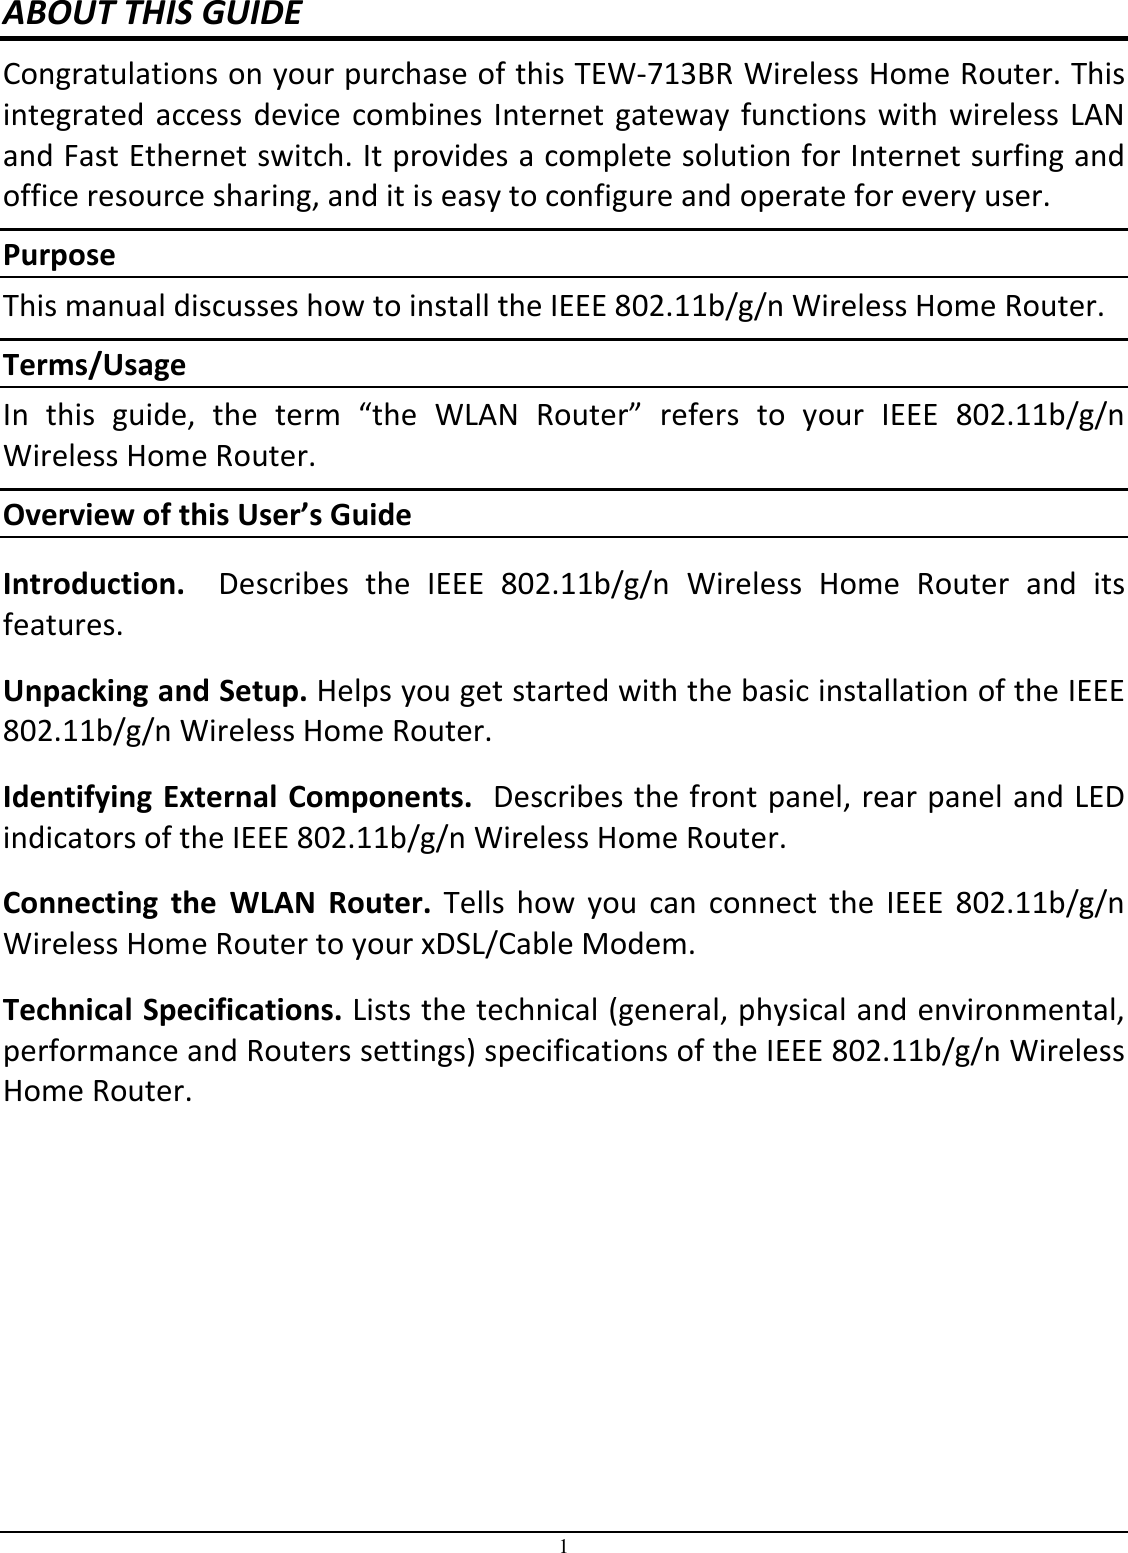 1 ABOUT THIS GUIDE Congratulations on your purchase of this TEW-713BR Wireless Home Router. This integrated access device combines Internet gateway functions with wireless LAN and Fast Ethernet switch. It provides a complete solution for Internet surfing and office resource sharing, and it is easy to configure and operate for every user. Purpose This manual discusses how to install the IEEE 802.11b/g/n Wireless Home Router.  Terms/Usage In  this  guide,  the  term  “the  WLAN  Router”  refers  to  your  IEEE  802.11b/g/n Wireless Home Router. Overview of this User’s Guide Introduction.    Describes  the  IEEE  802.11b/g/n  Wireless  Home  Router  and  its features. Unpacking and Setup. Helps you get started with the basic installation of the IEEE 802.11b/g/n Wireless Home Router. Identifying External Components.  Describes the front panel, rear panel and LED indicators of the IEEE 802.11b/g/n Wireless Home Router. Connecting  the  WLAN  Router.  Tells  how  you can  connect the  IEEE  802.11b/g/n Wireless Home Router to your xDSL/Cable Modem. Technical Specifications. Lists the technical (general, physical and environmental, performance and Routers settings) specifications of the IEEE 802.11b/g/n Wireless Home Router.  